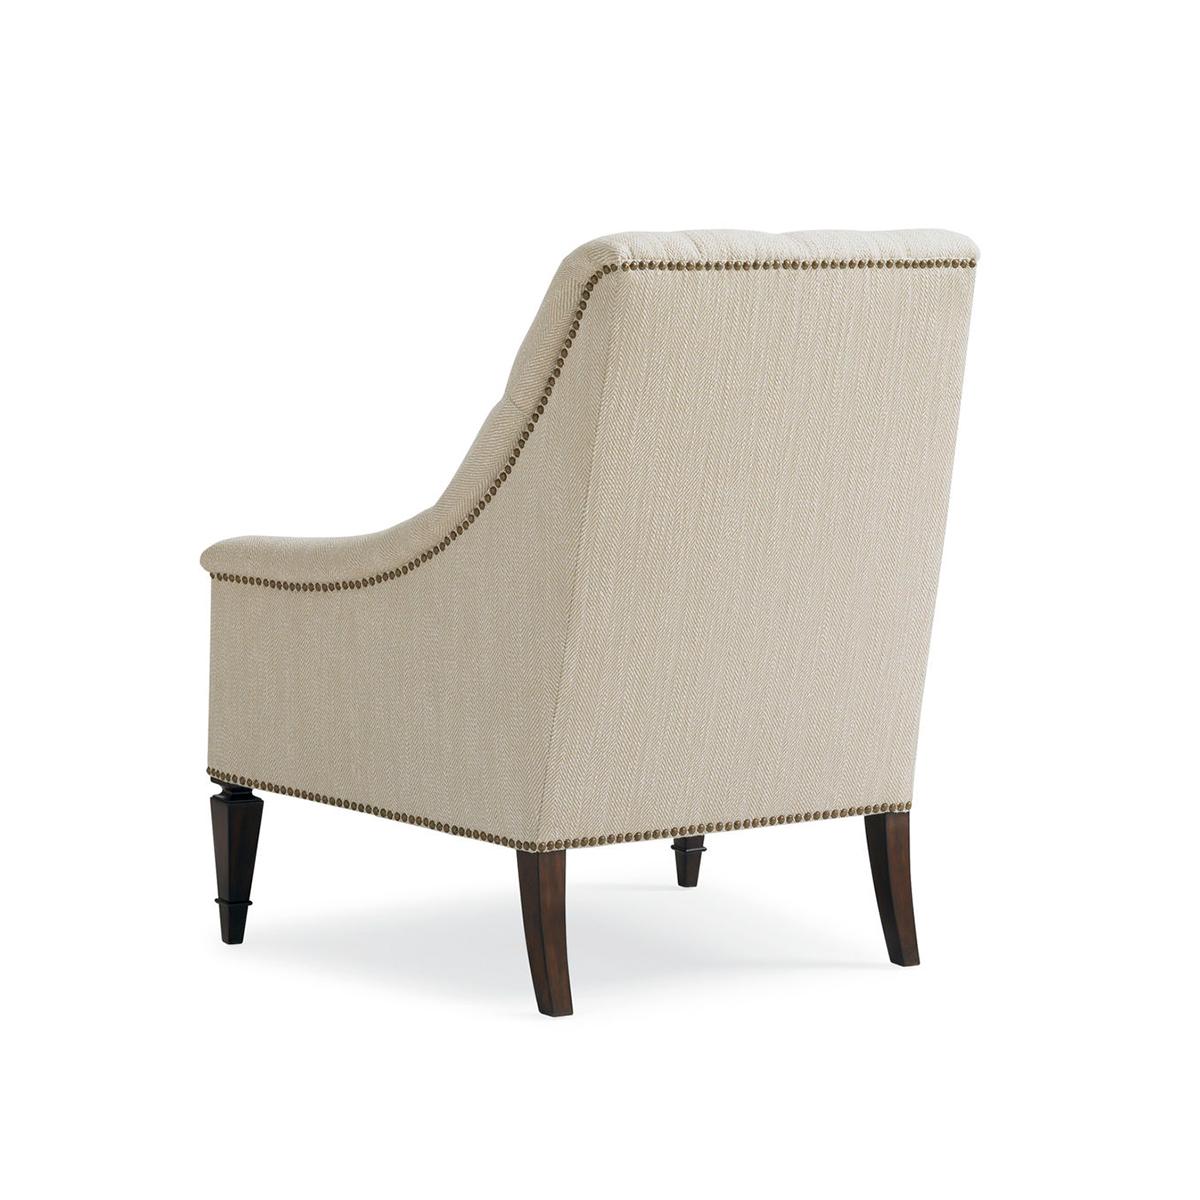 With a tufted and upholstered backrest and cushion, with brass nailhead trim details raised on traditional square tapered legs.

Dimensions: 33